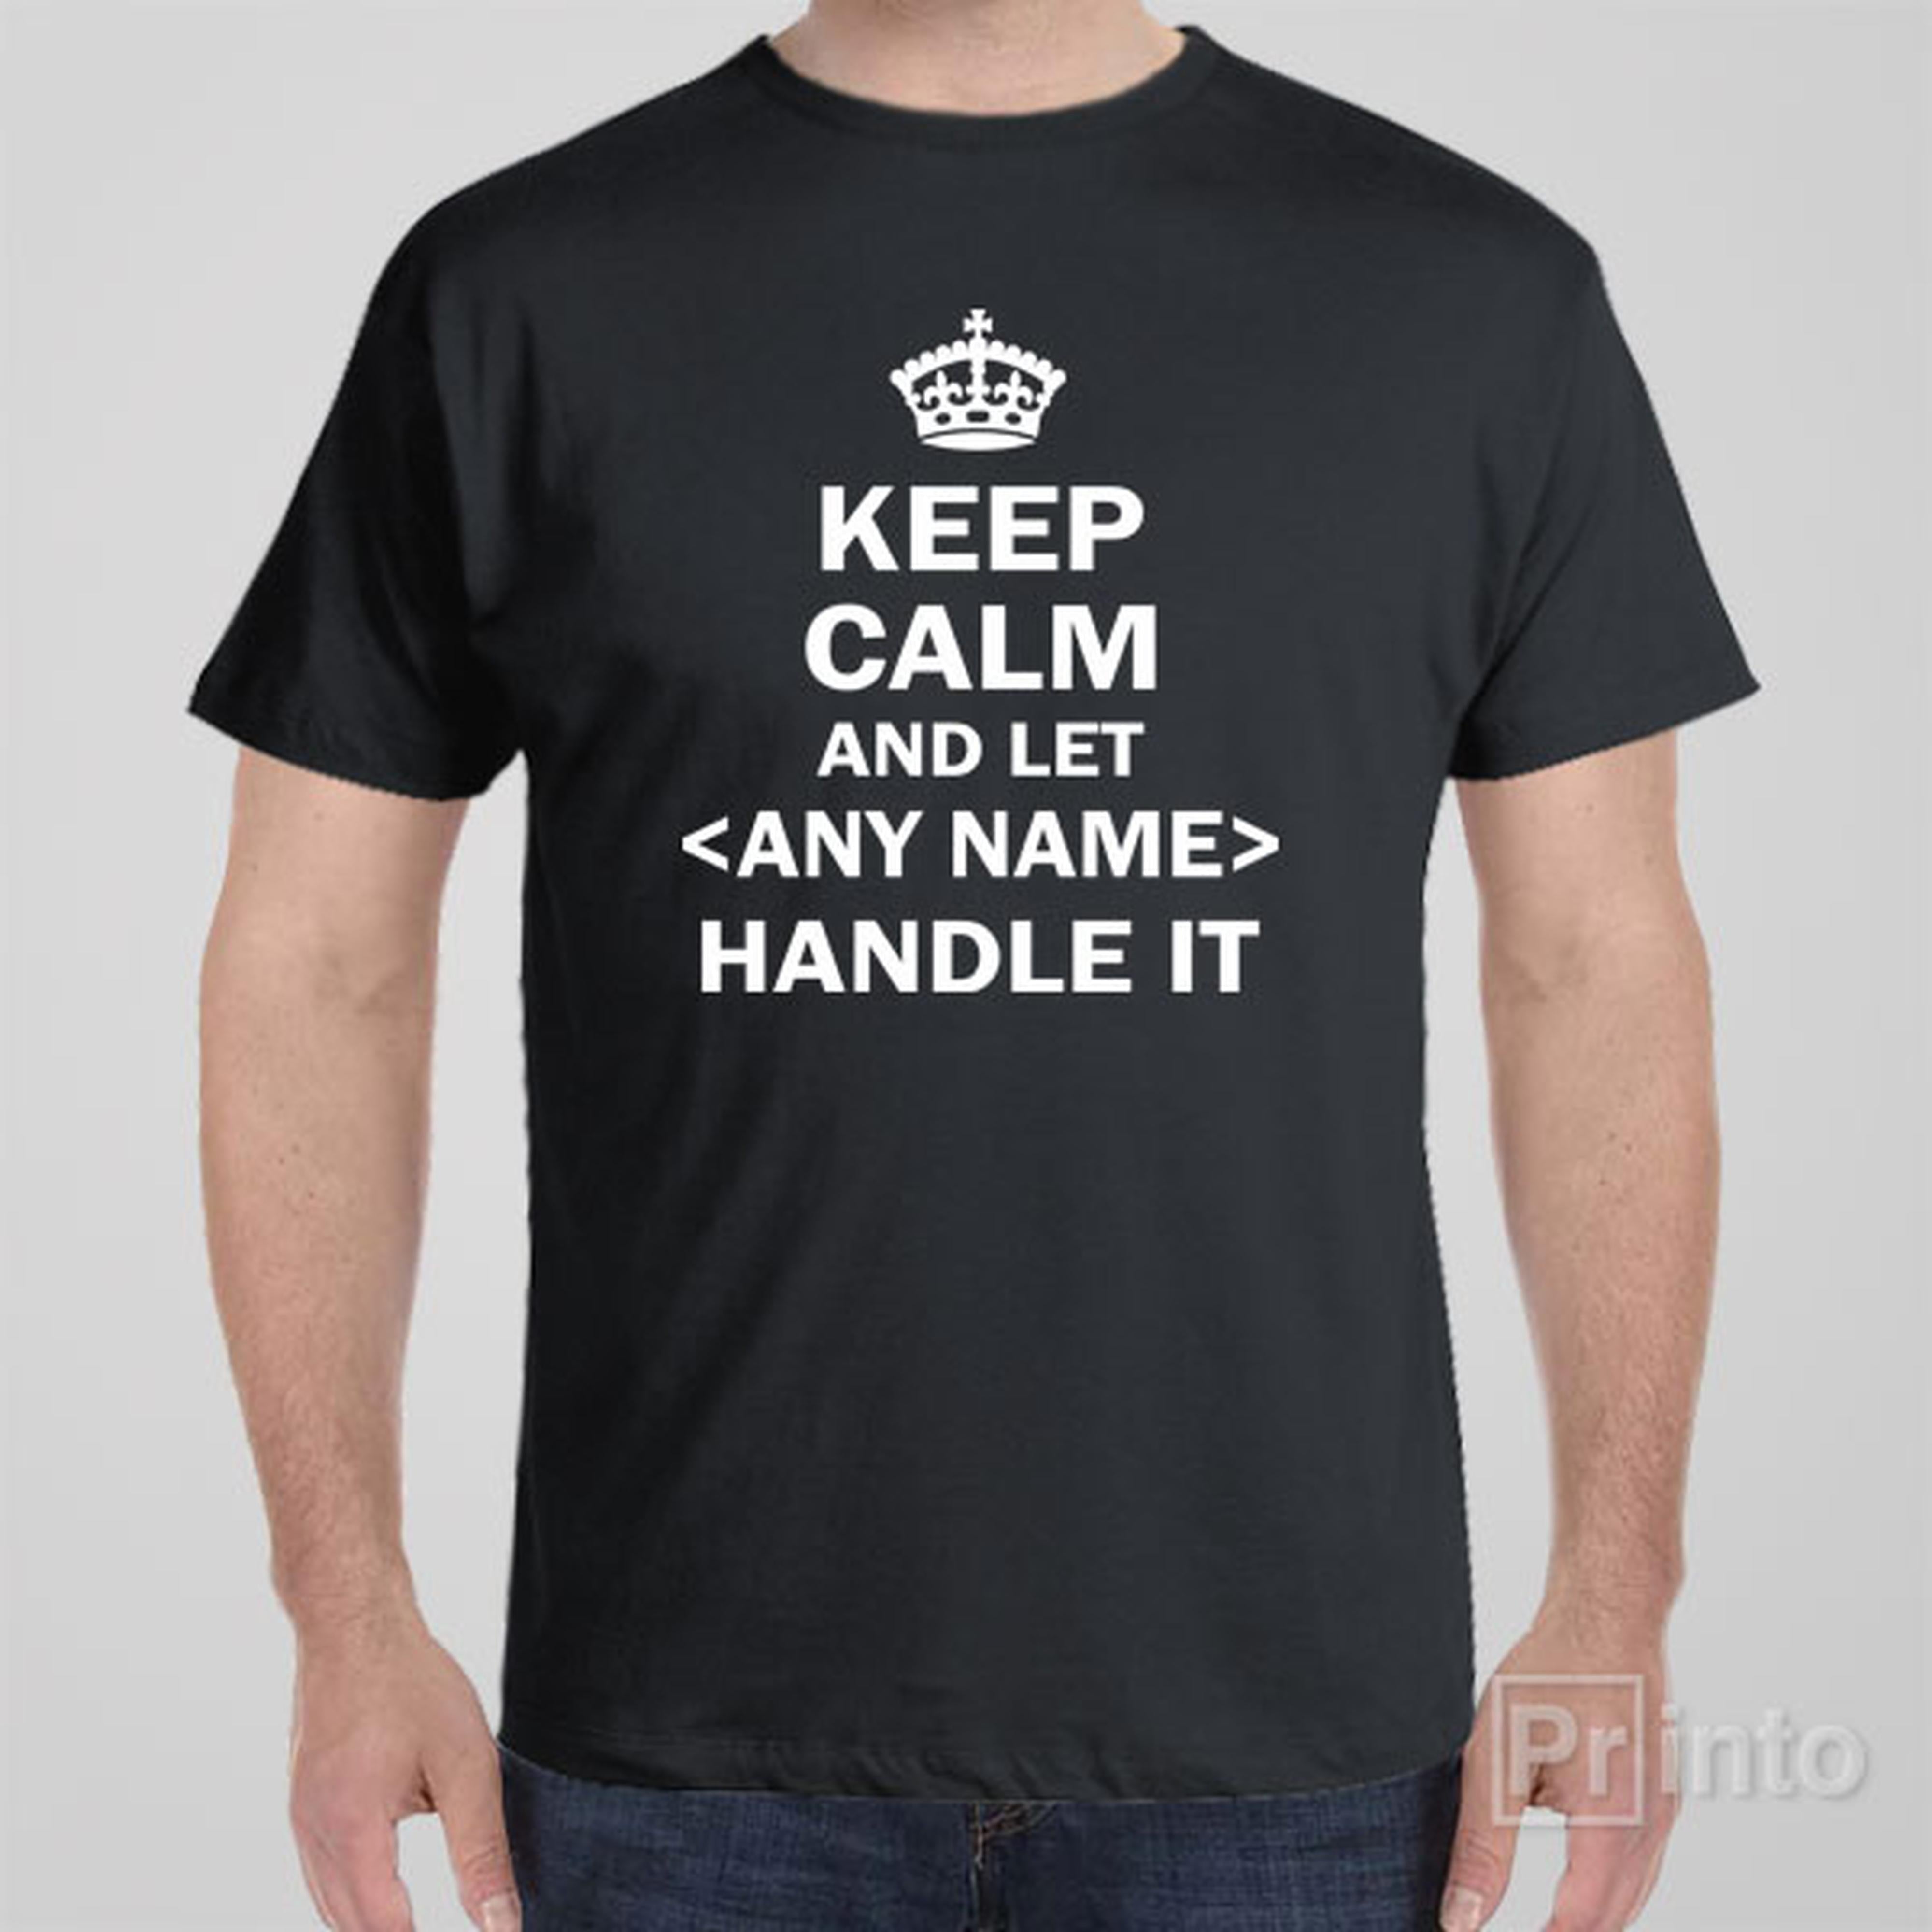 keep-calm-and-let-handle-it-t-shirt